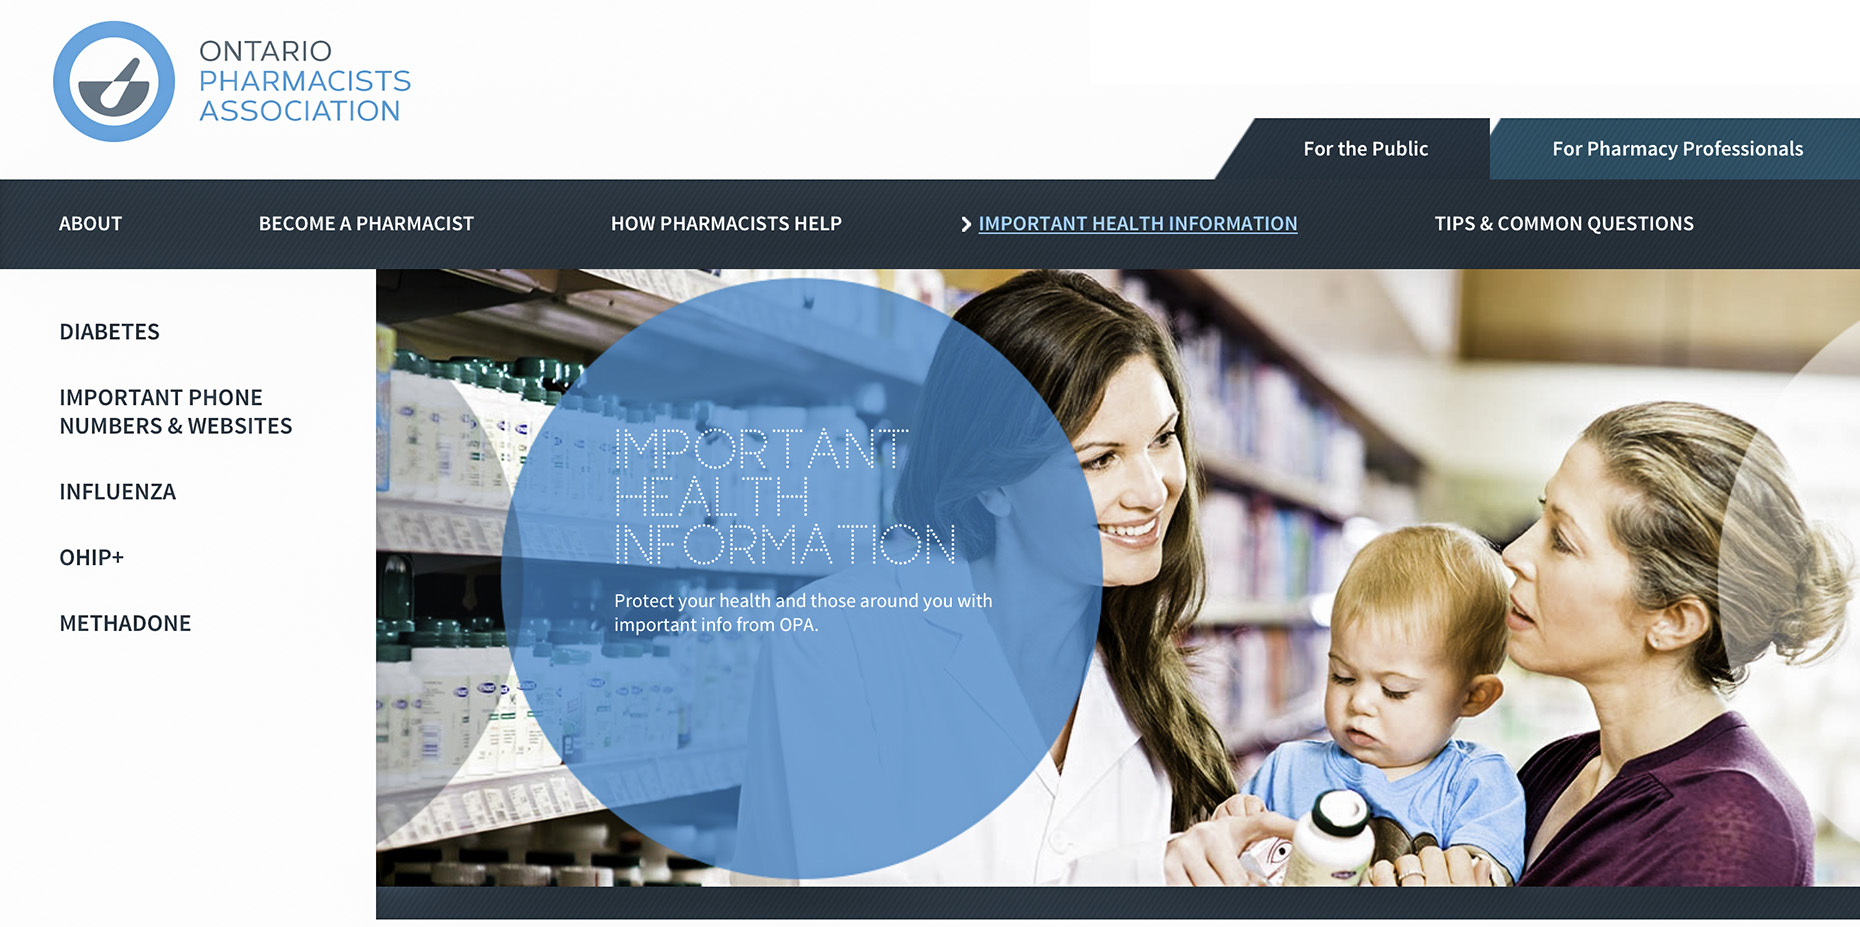 Website banner layout of pharmacist for Ontario Pharmacists Association health and wellness campaign